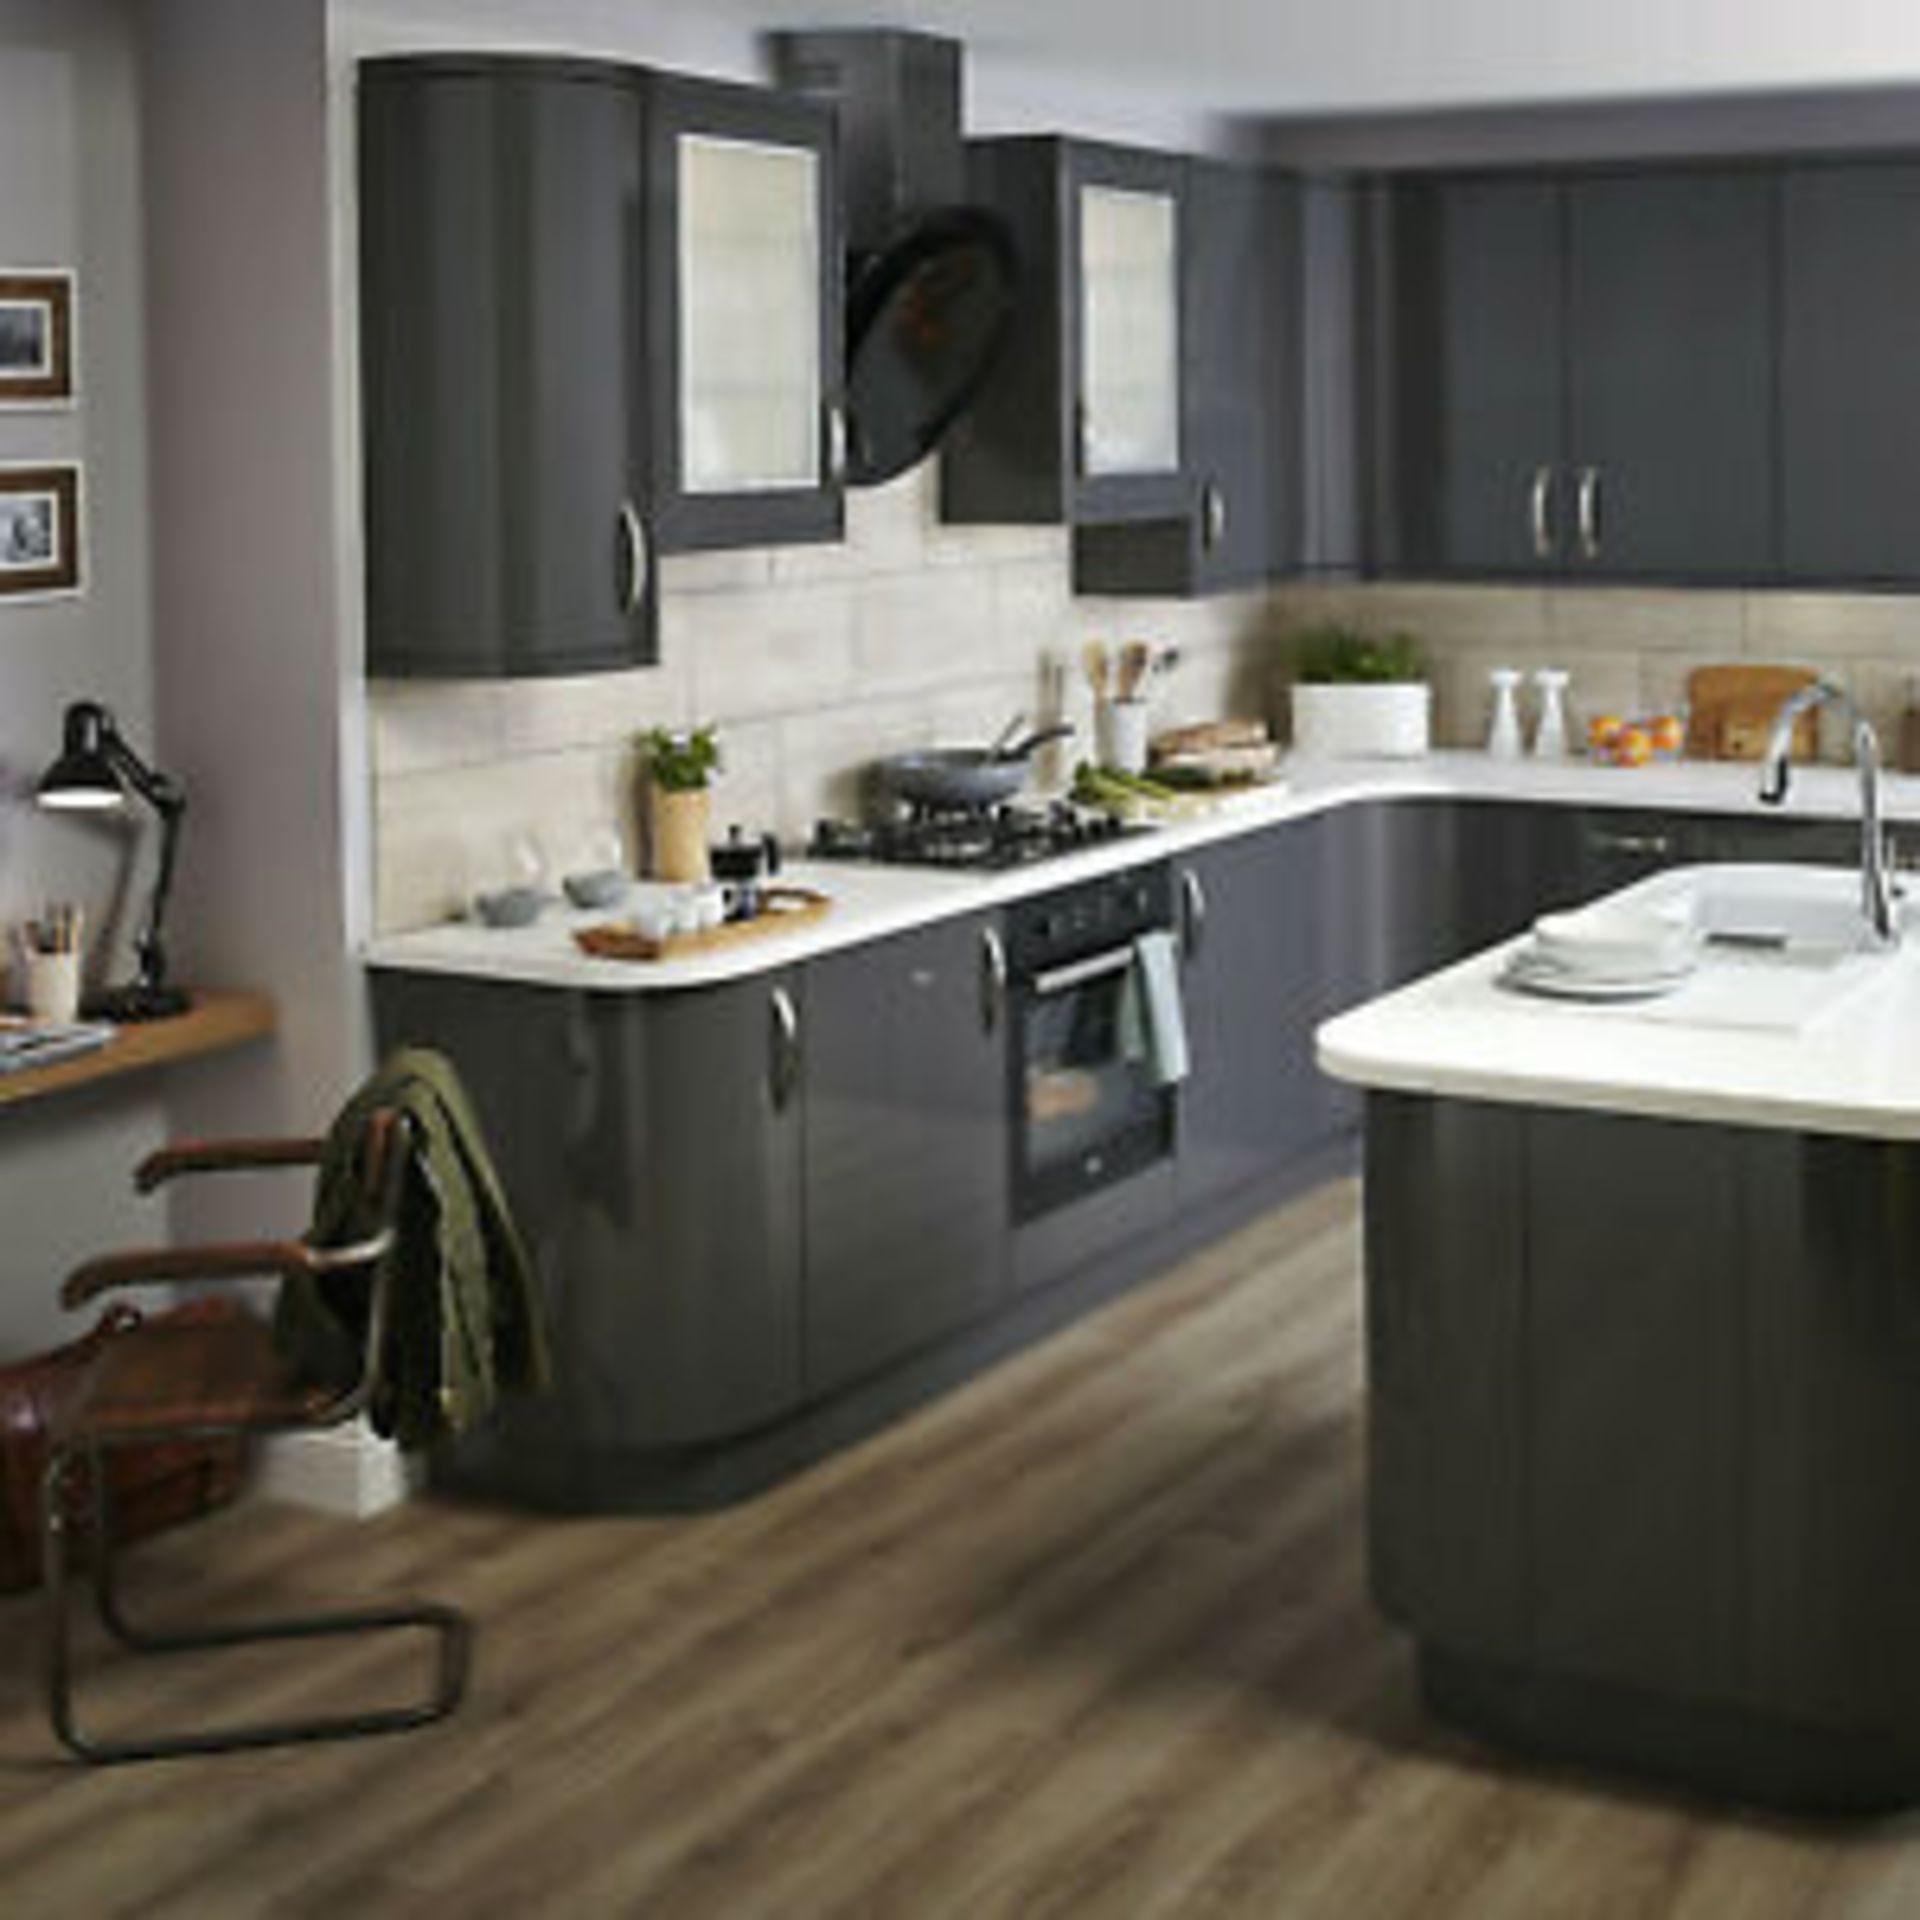 Circa 4,295 items of Kitchen Goods from the following ranges: Gloss White, Gloss Cream, Sandford - Image 4 of 15